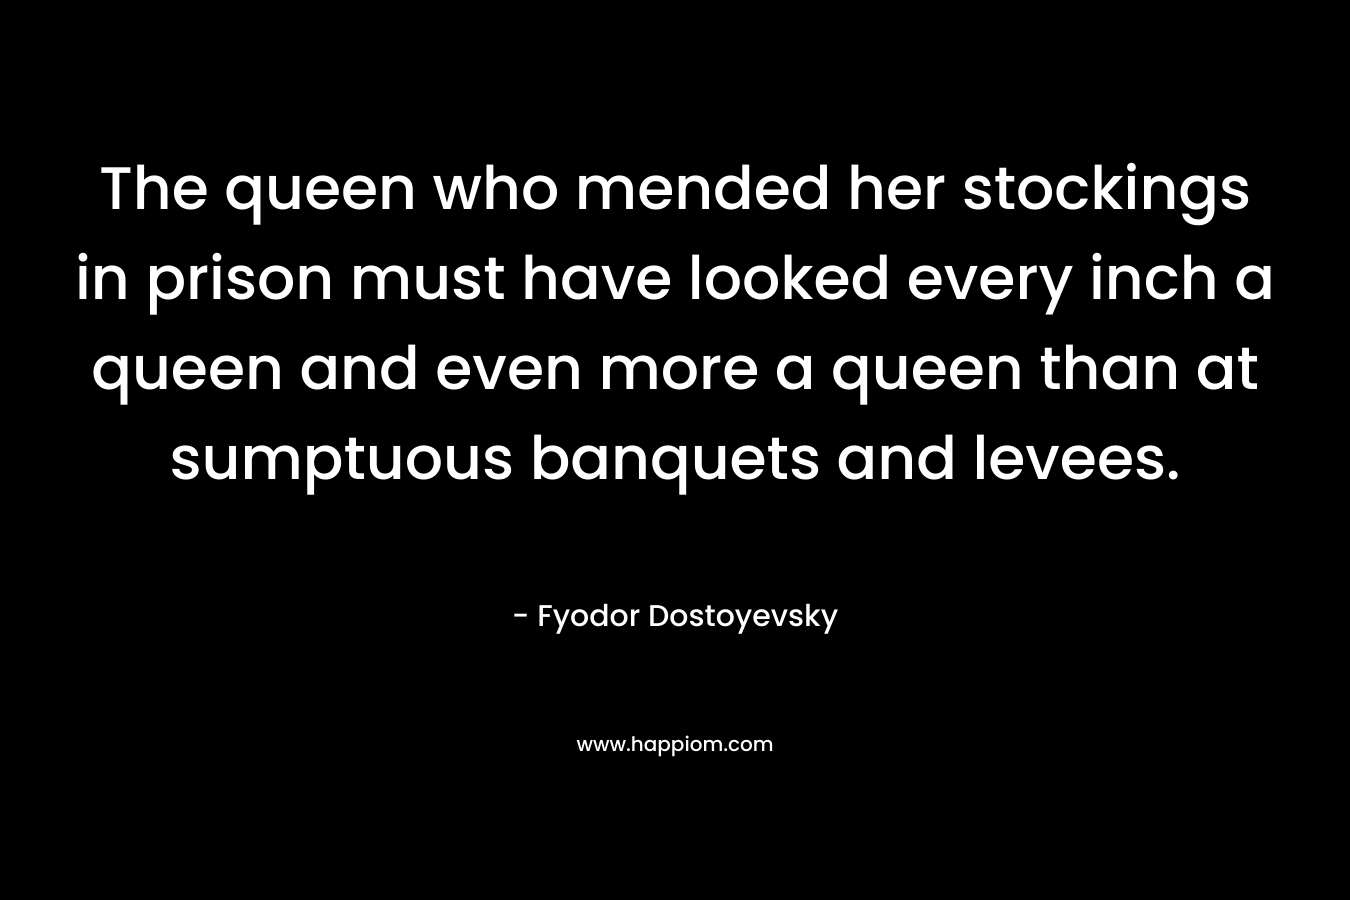 The queen who mended her stockings in prison must have looked every inch a queen and even more a queen than at sumptuous banquets and levees.